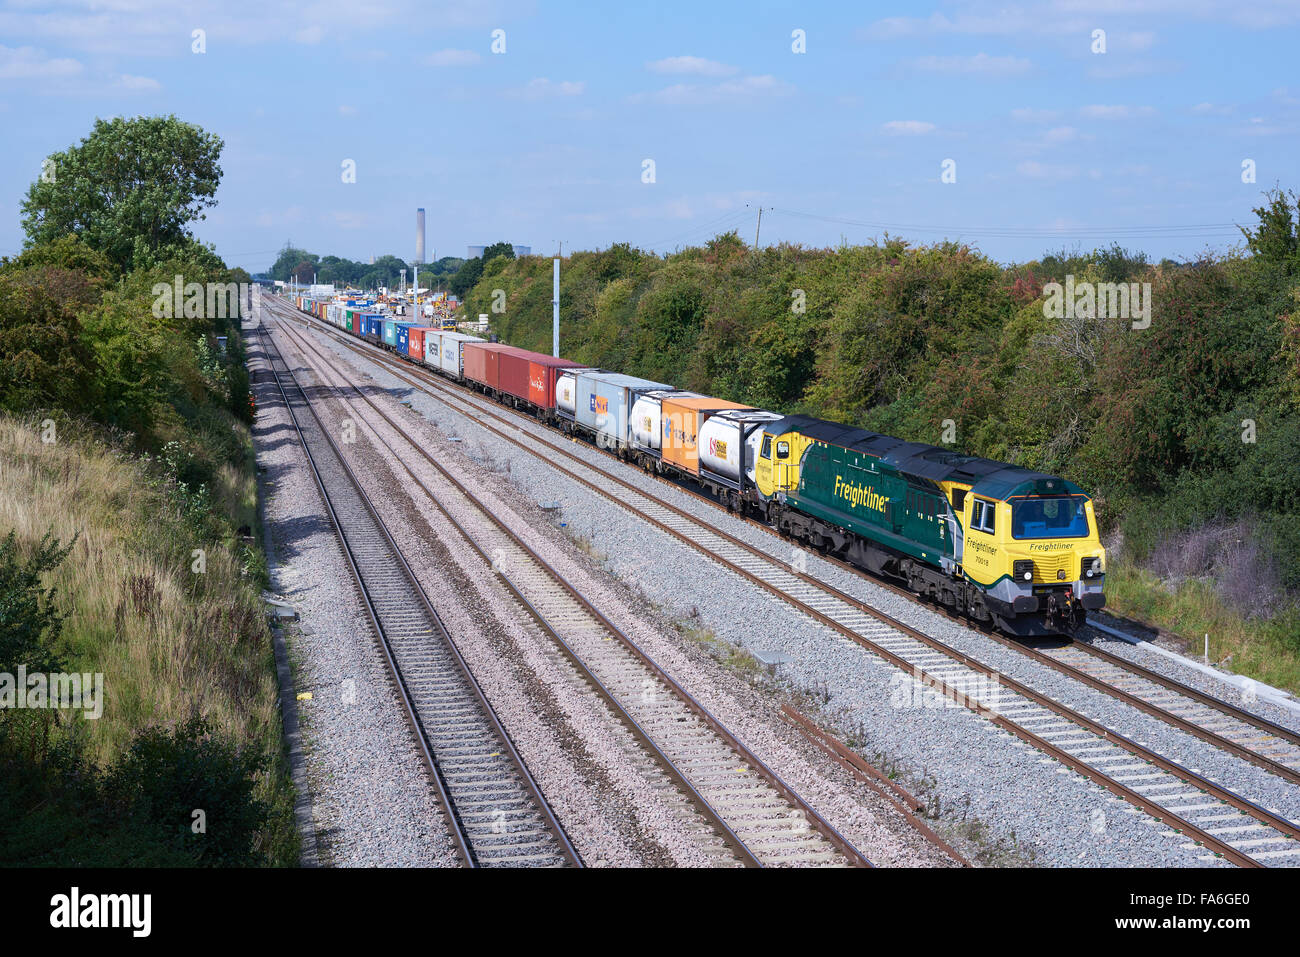 Freightliners 70018 heads through Moreton Cutting Nr Didcot with 4O70 Wentloog - Southampton liner on 10th Sept 2015. Stock Photo